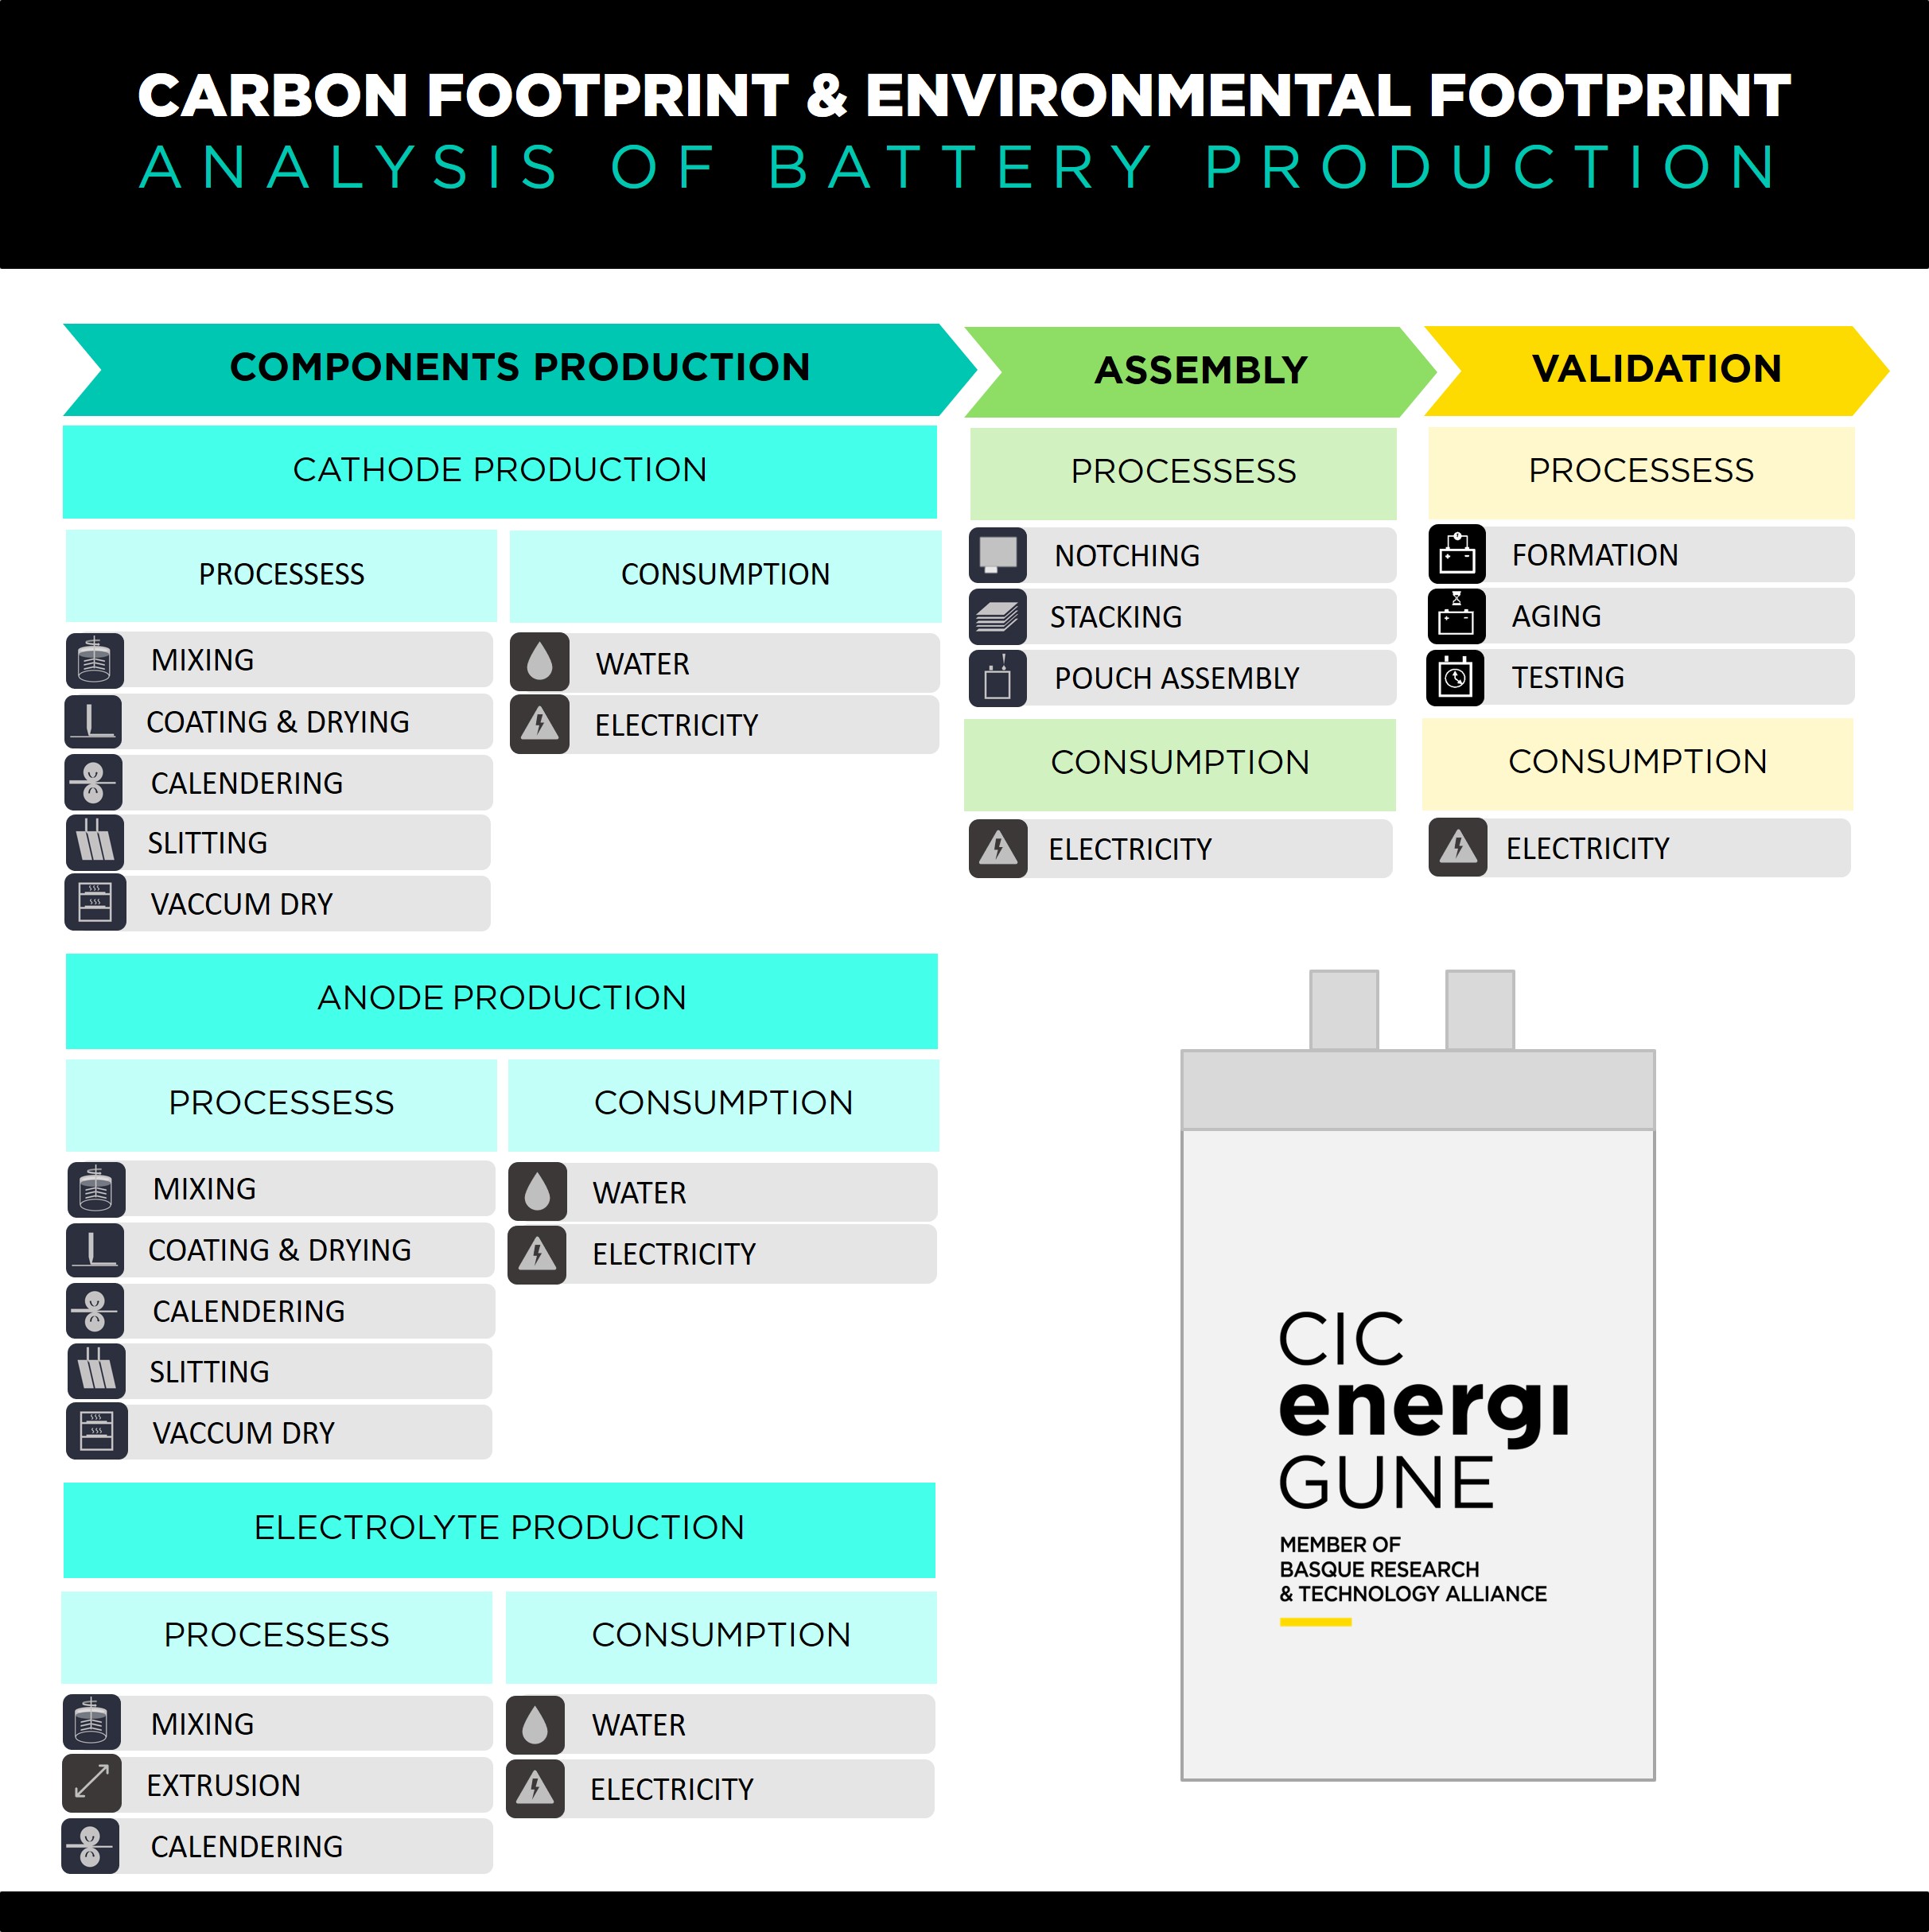 Carbon footprint and environmental footprint analysis in battery production. This graph shows the different stages from component production (cathode, anode and electrolyte) to assembly and validation at CIC energiGUNE. It also shows the main resource con